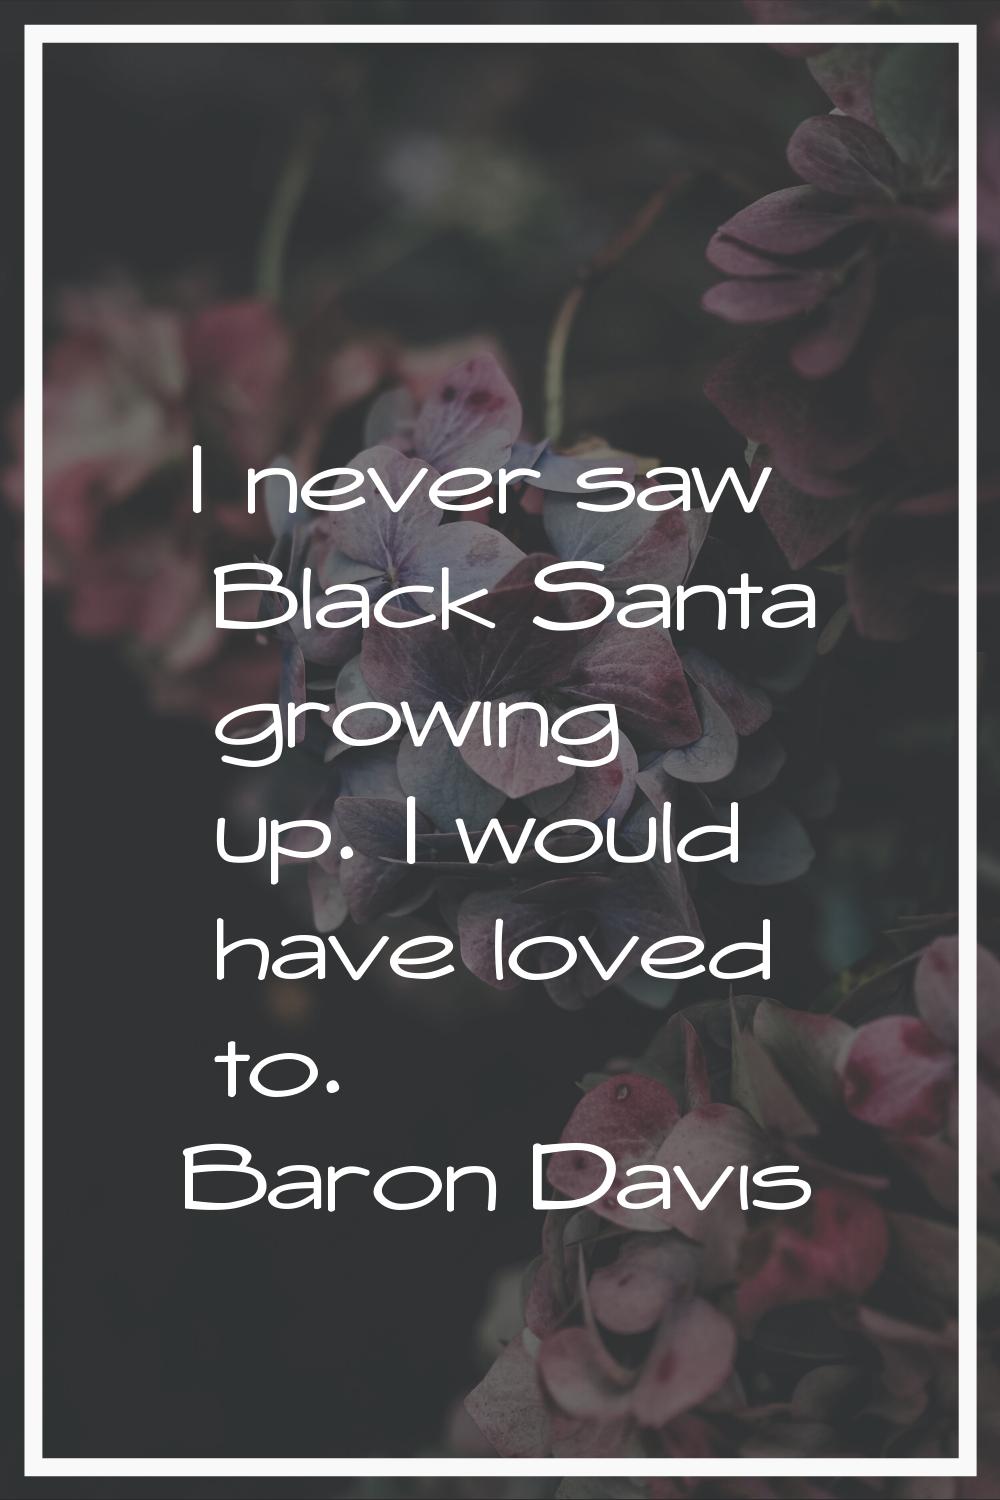 I never saw Black Santa growing up. I would have loved to.